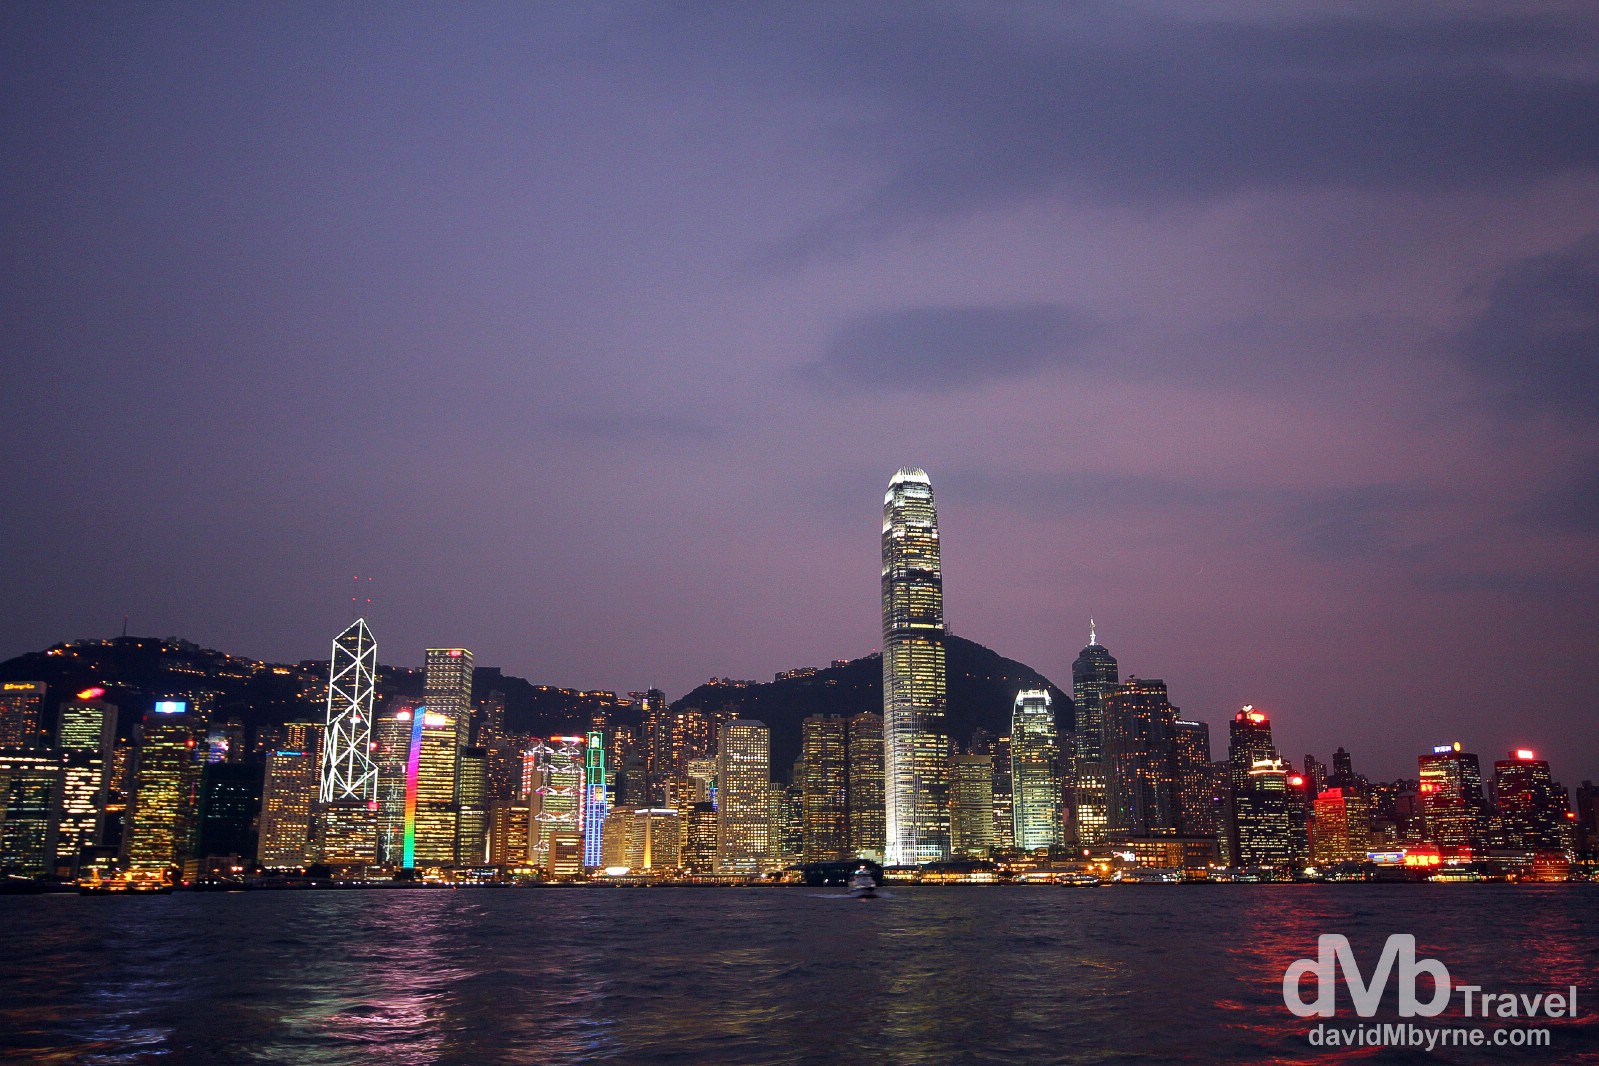 The skyline of Central Hong Kong as seen from across Victoria Harbour in Kowloon shortly after dusk. Hong Kong, China. October 17th 2012.